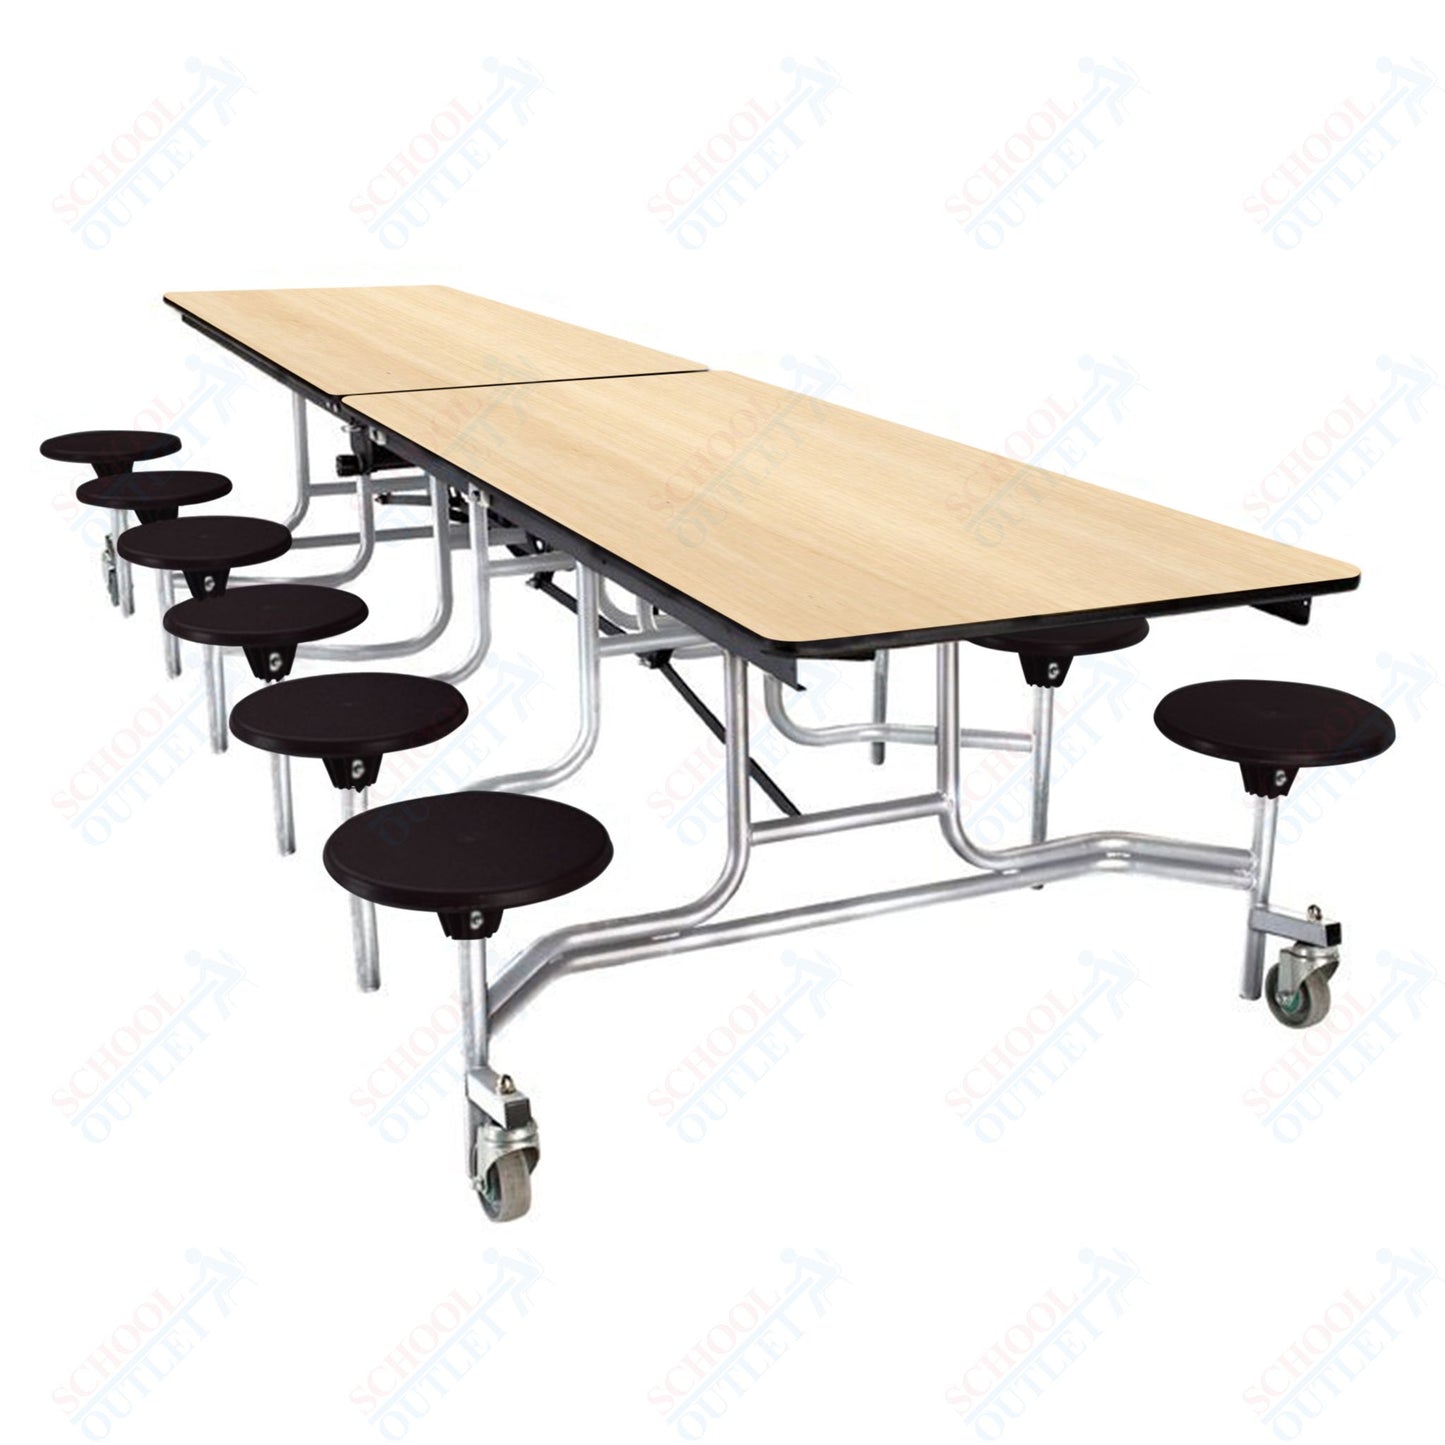 NPS Mobile Cafeteria Table - 30" W x 10' L - 12 Stools  - Particleboard Core - T-Molding Edge - Chrome Frame